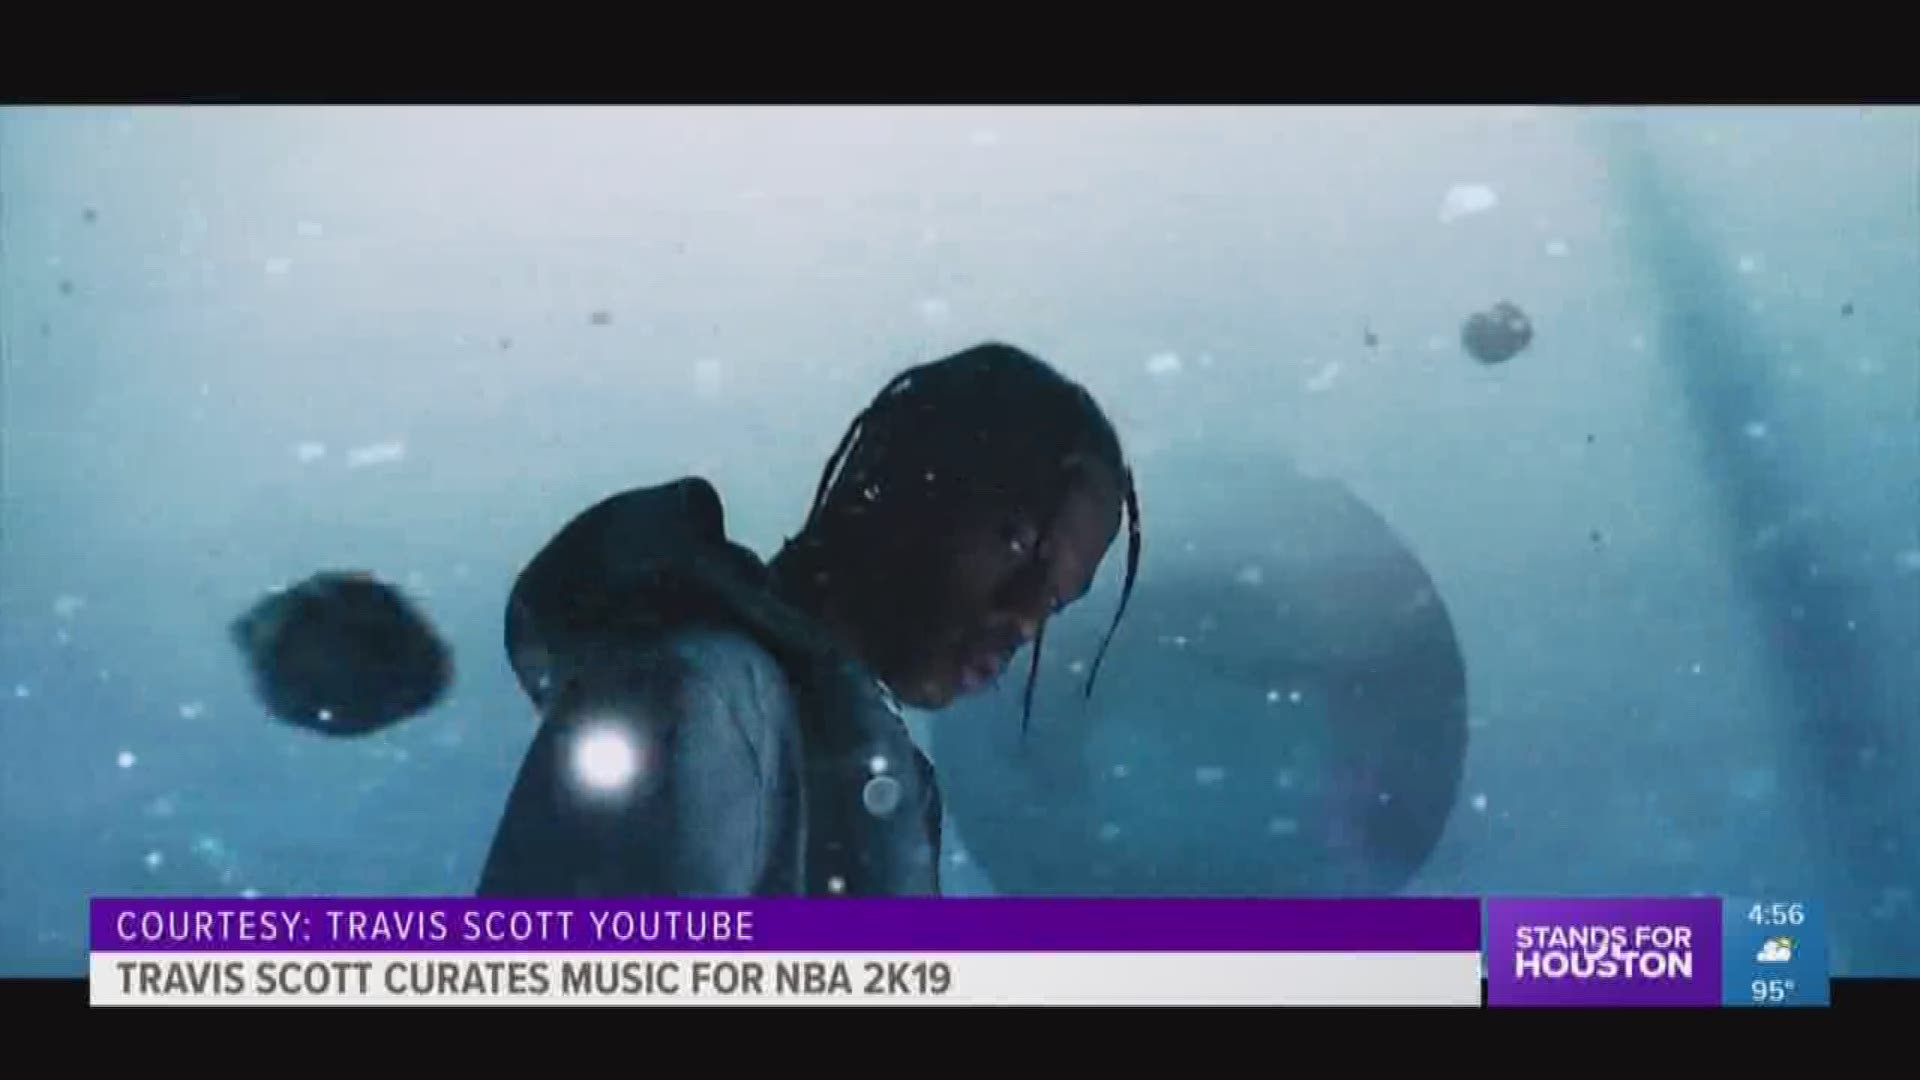 Rapper and Missouri City native Travis Scott curated the soundtrack for the NBA2K19 video game.